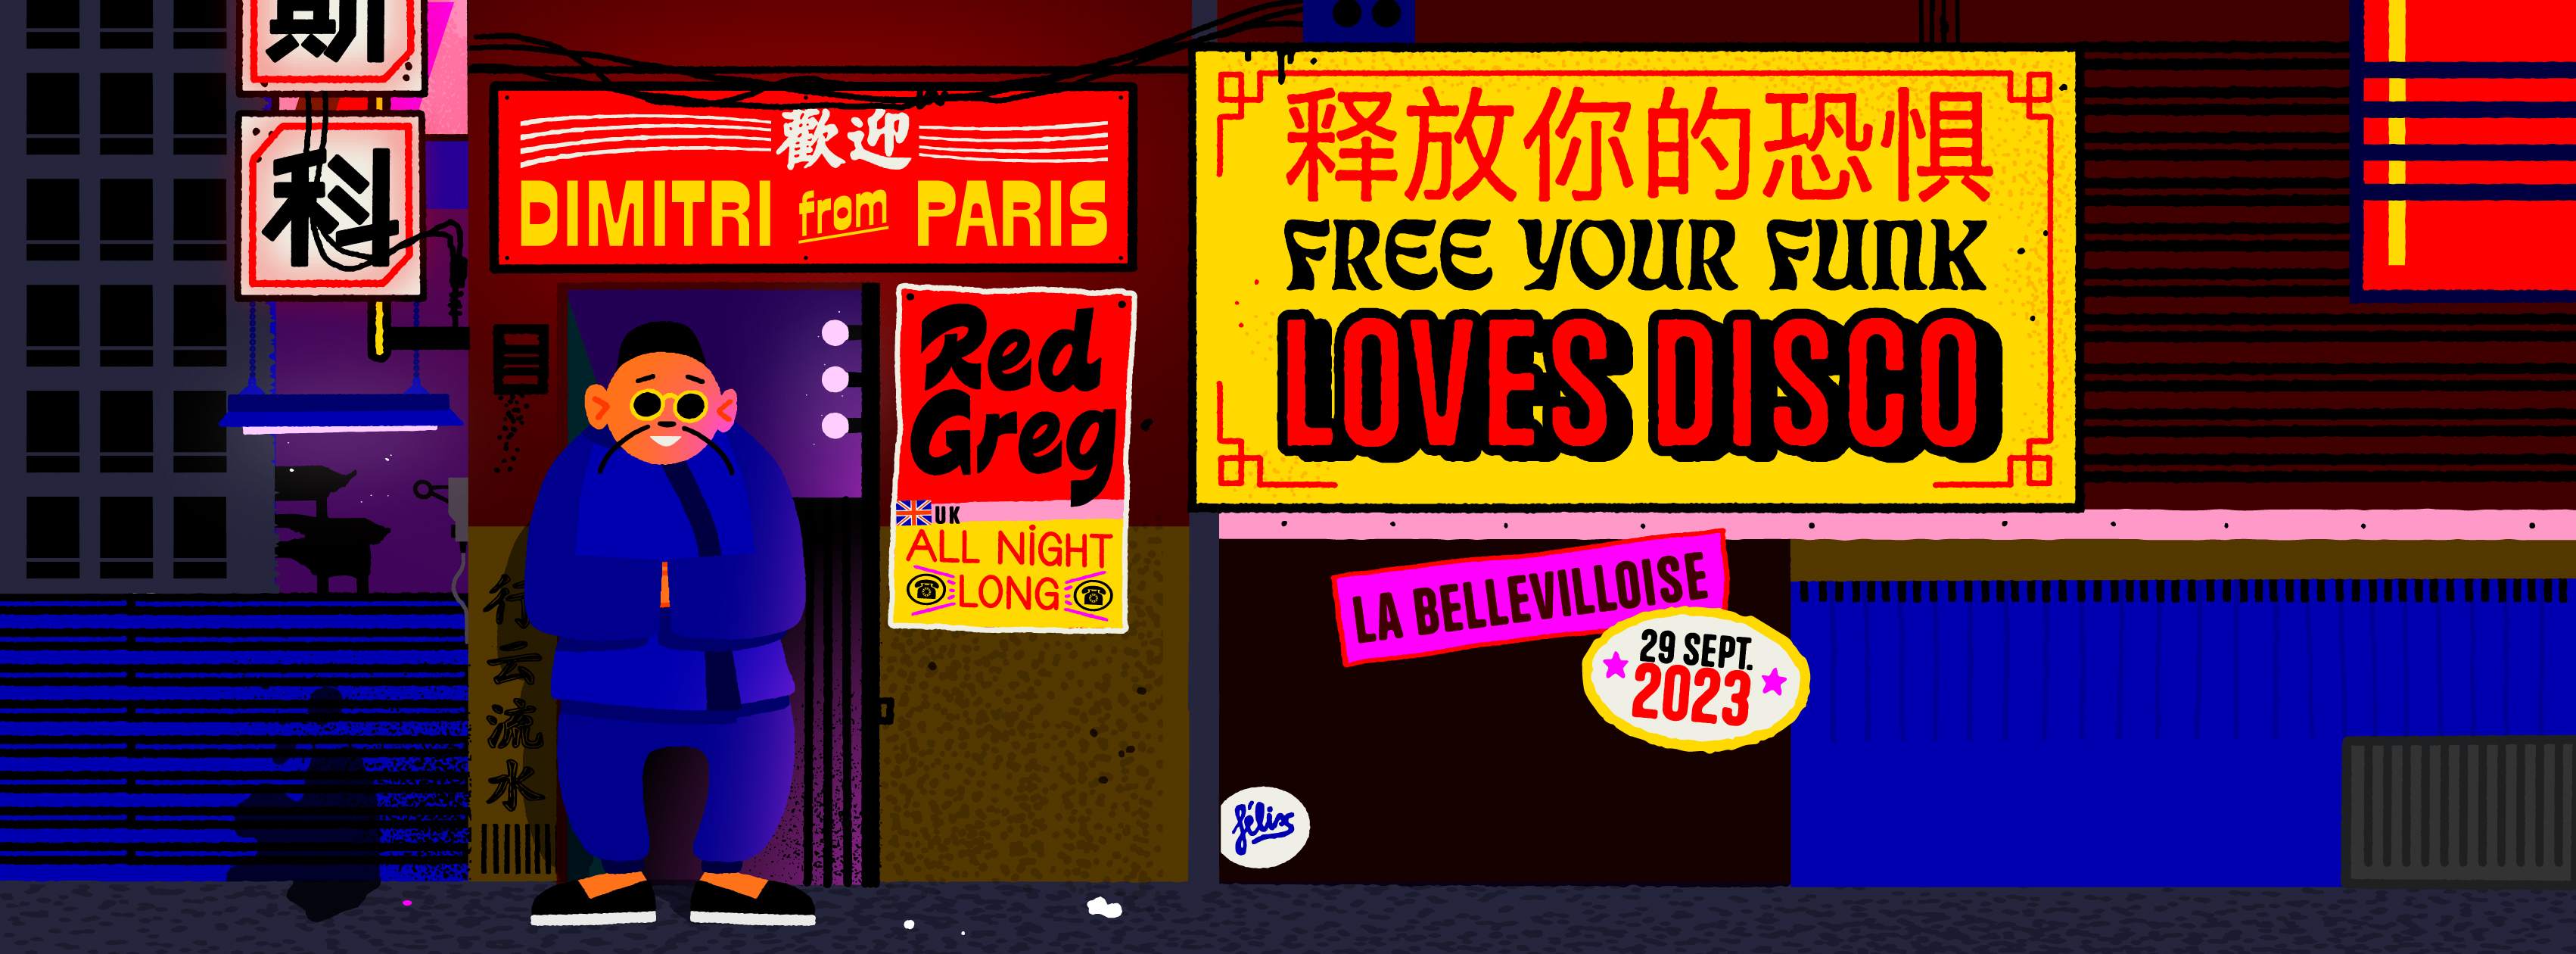 Free Your Funk Loves Disco: Dimitri From Paris & Red Greg All Night Long - フライヤー裏